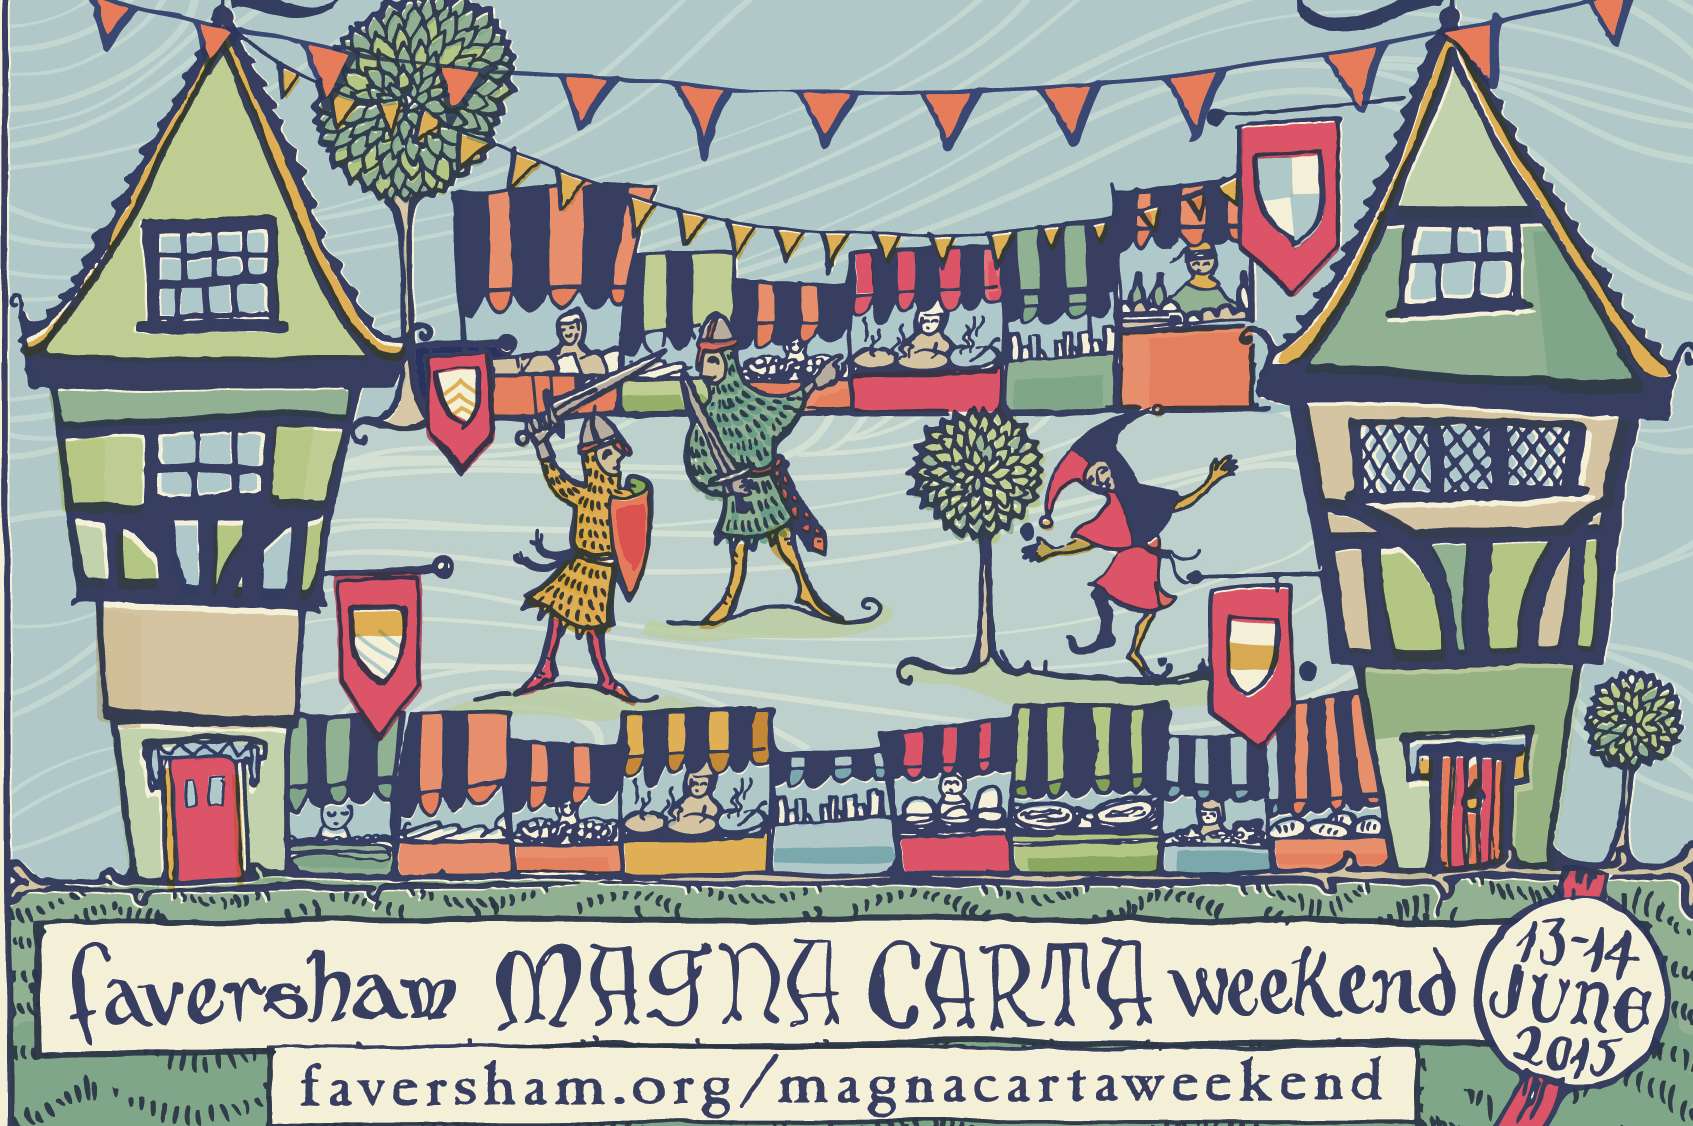 Magna Carta weekend takes place in June.